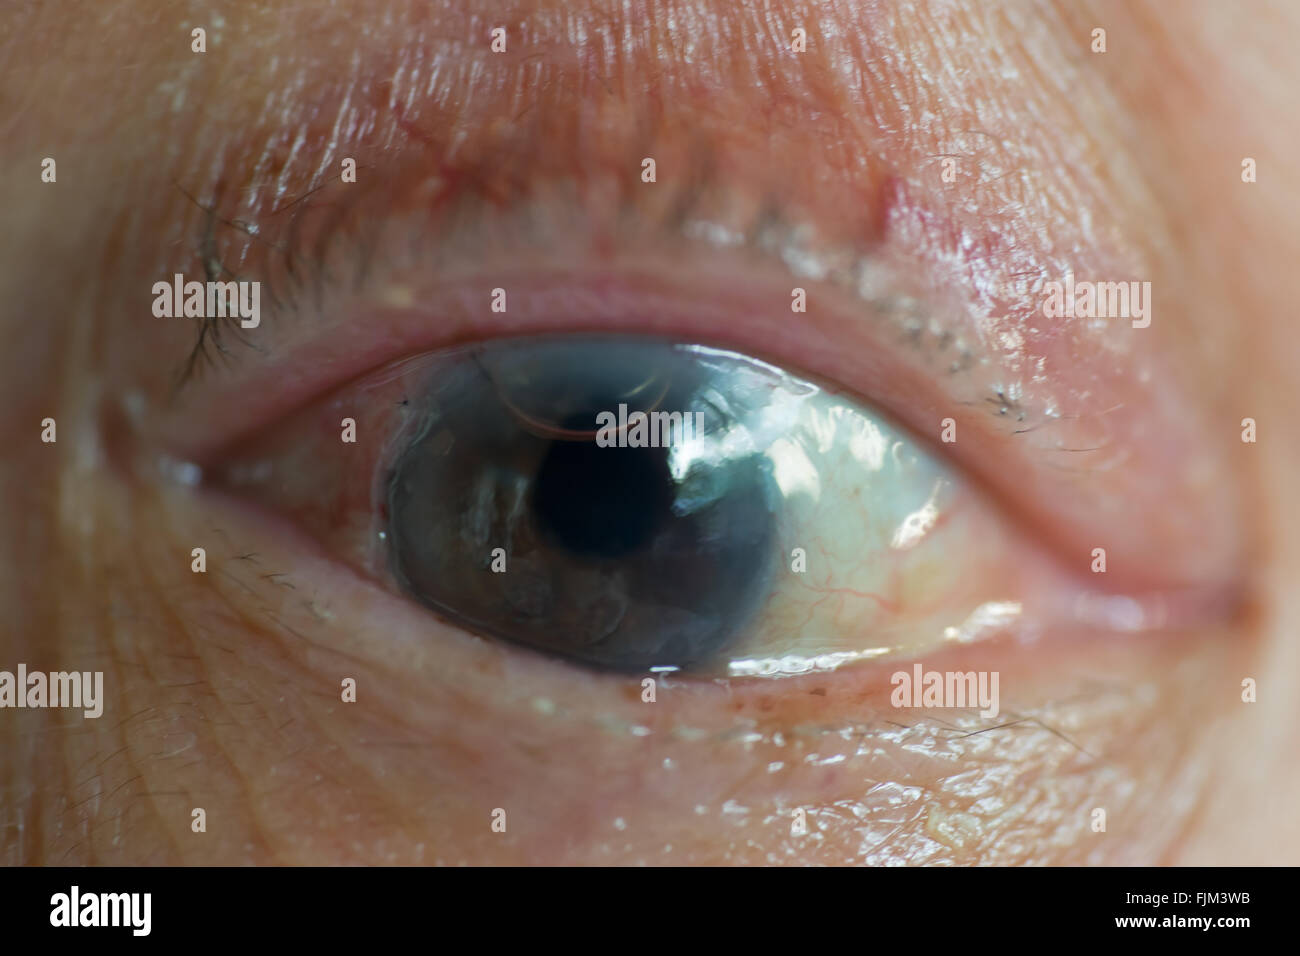 Old man's eye with trace of cornea surgical operation, air bubble, and silk suture Stock Photo